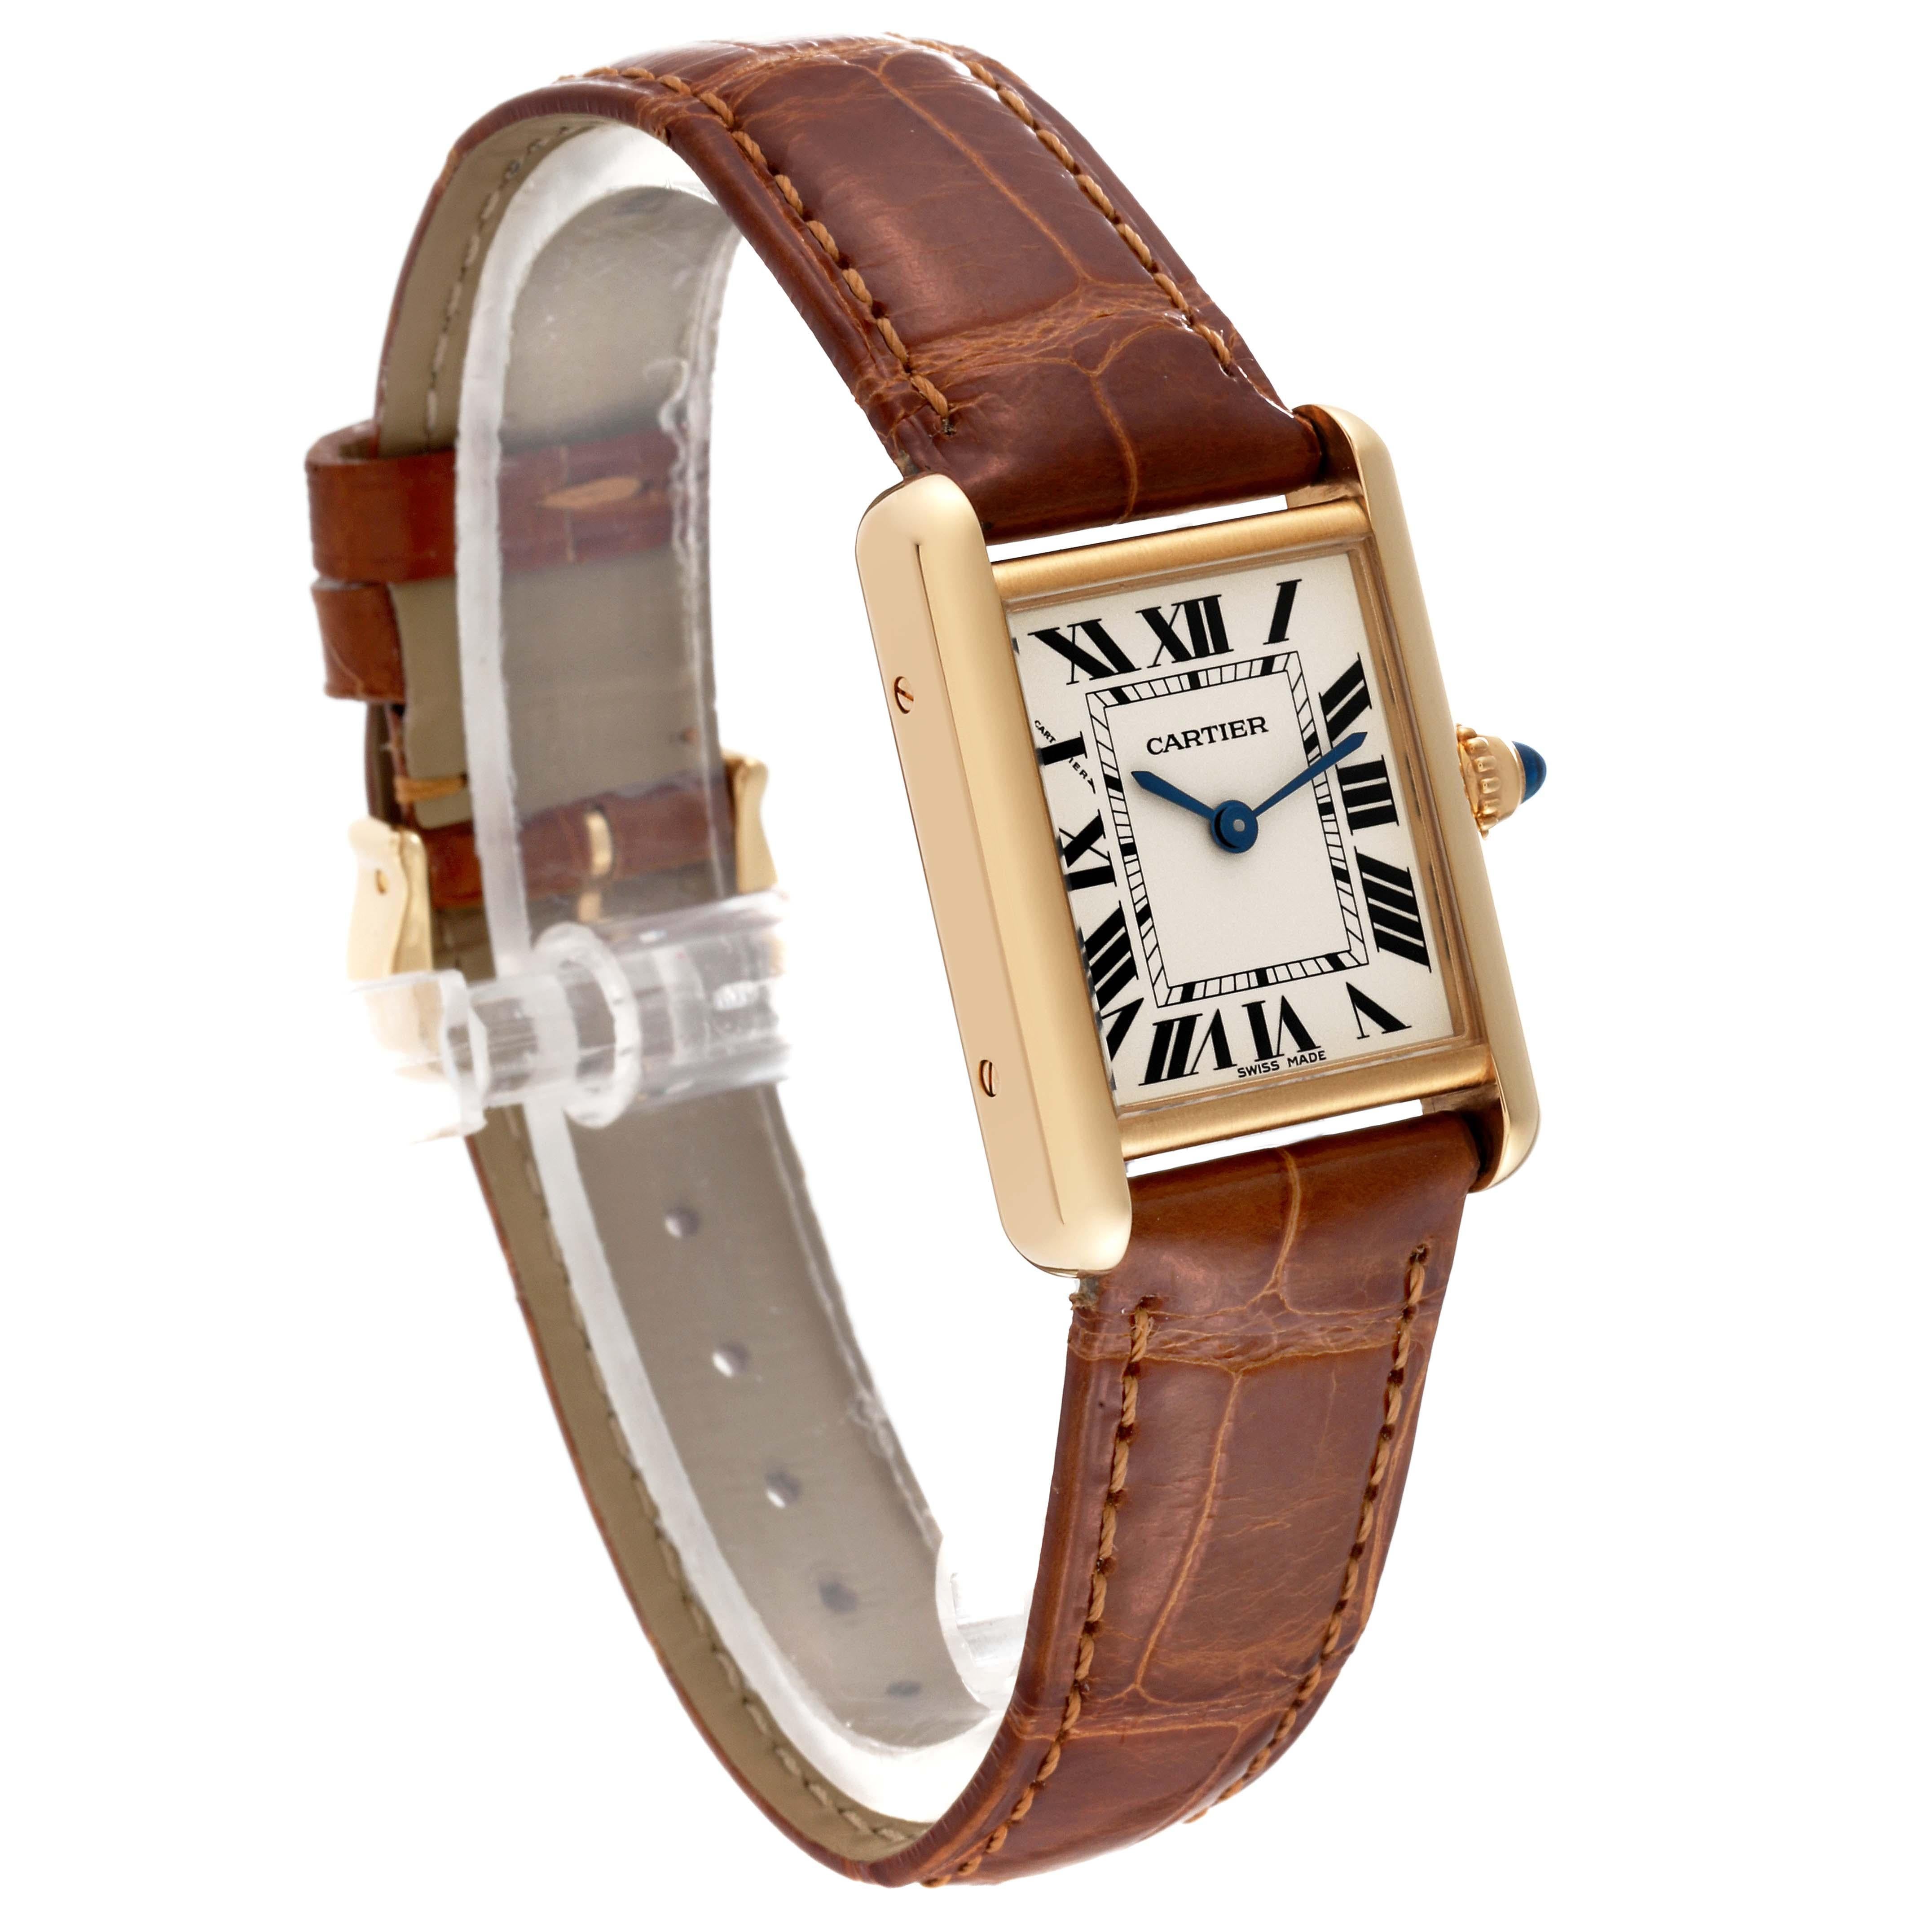 cartier brown leather watch